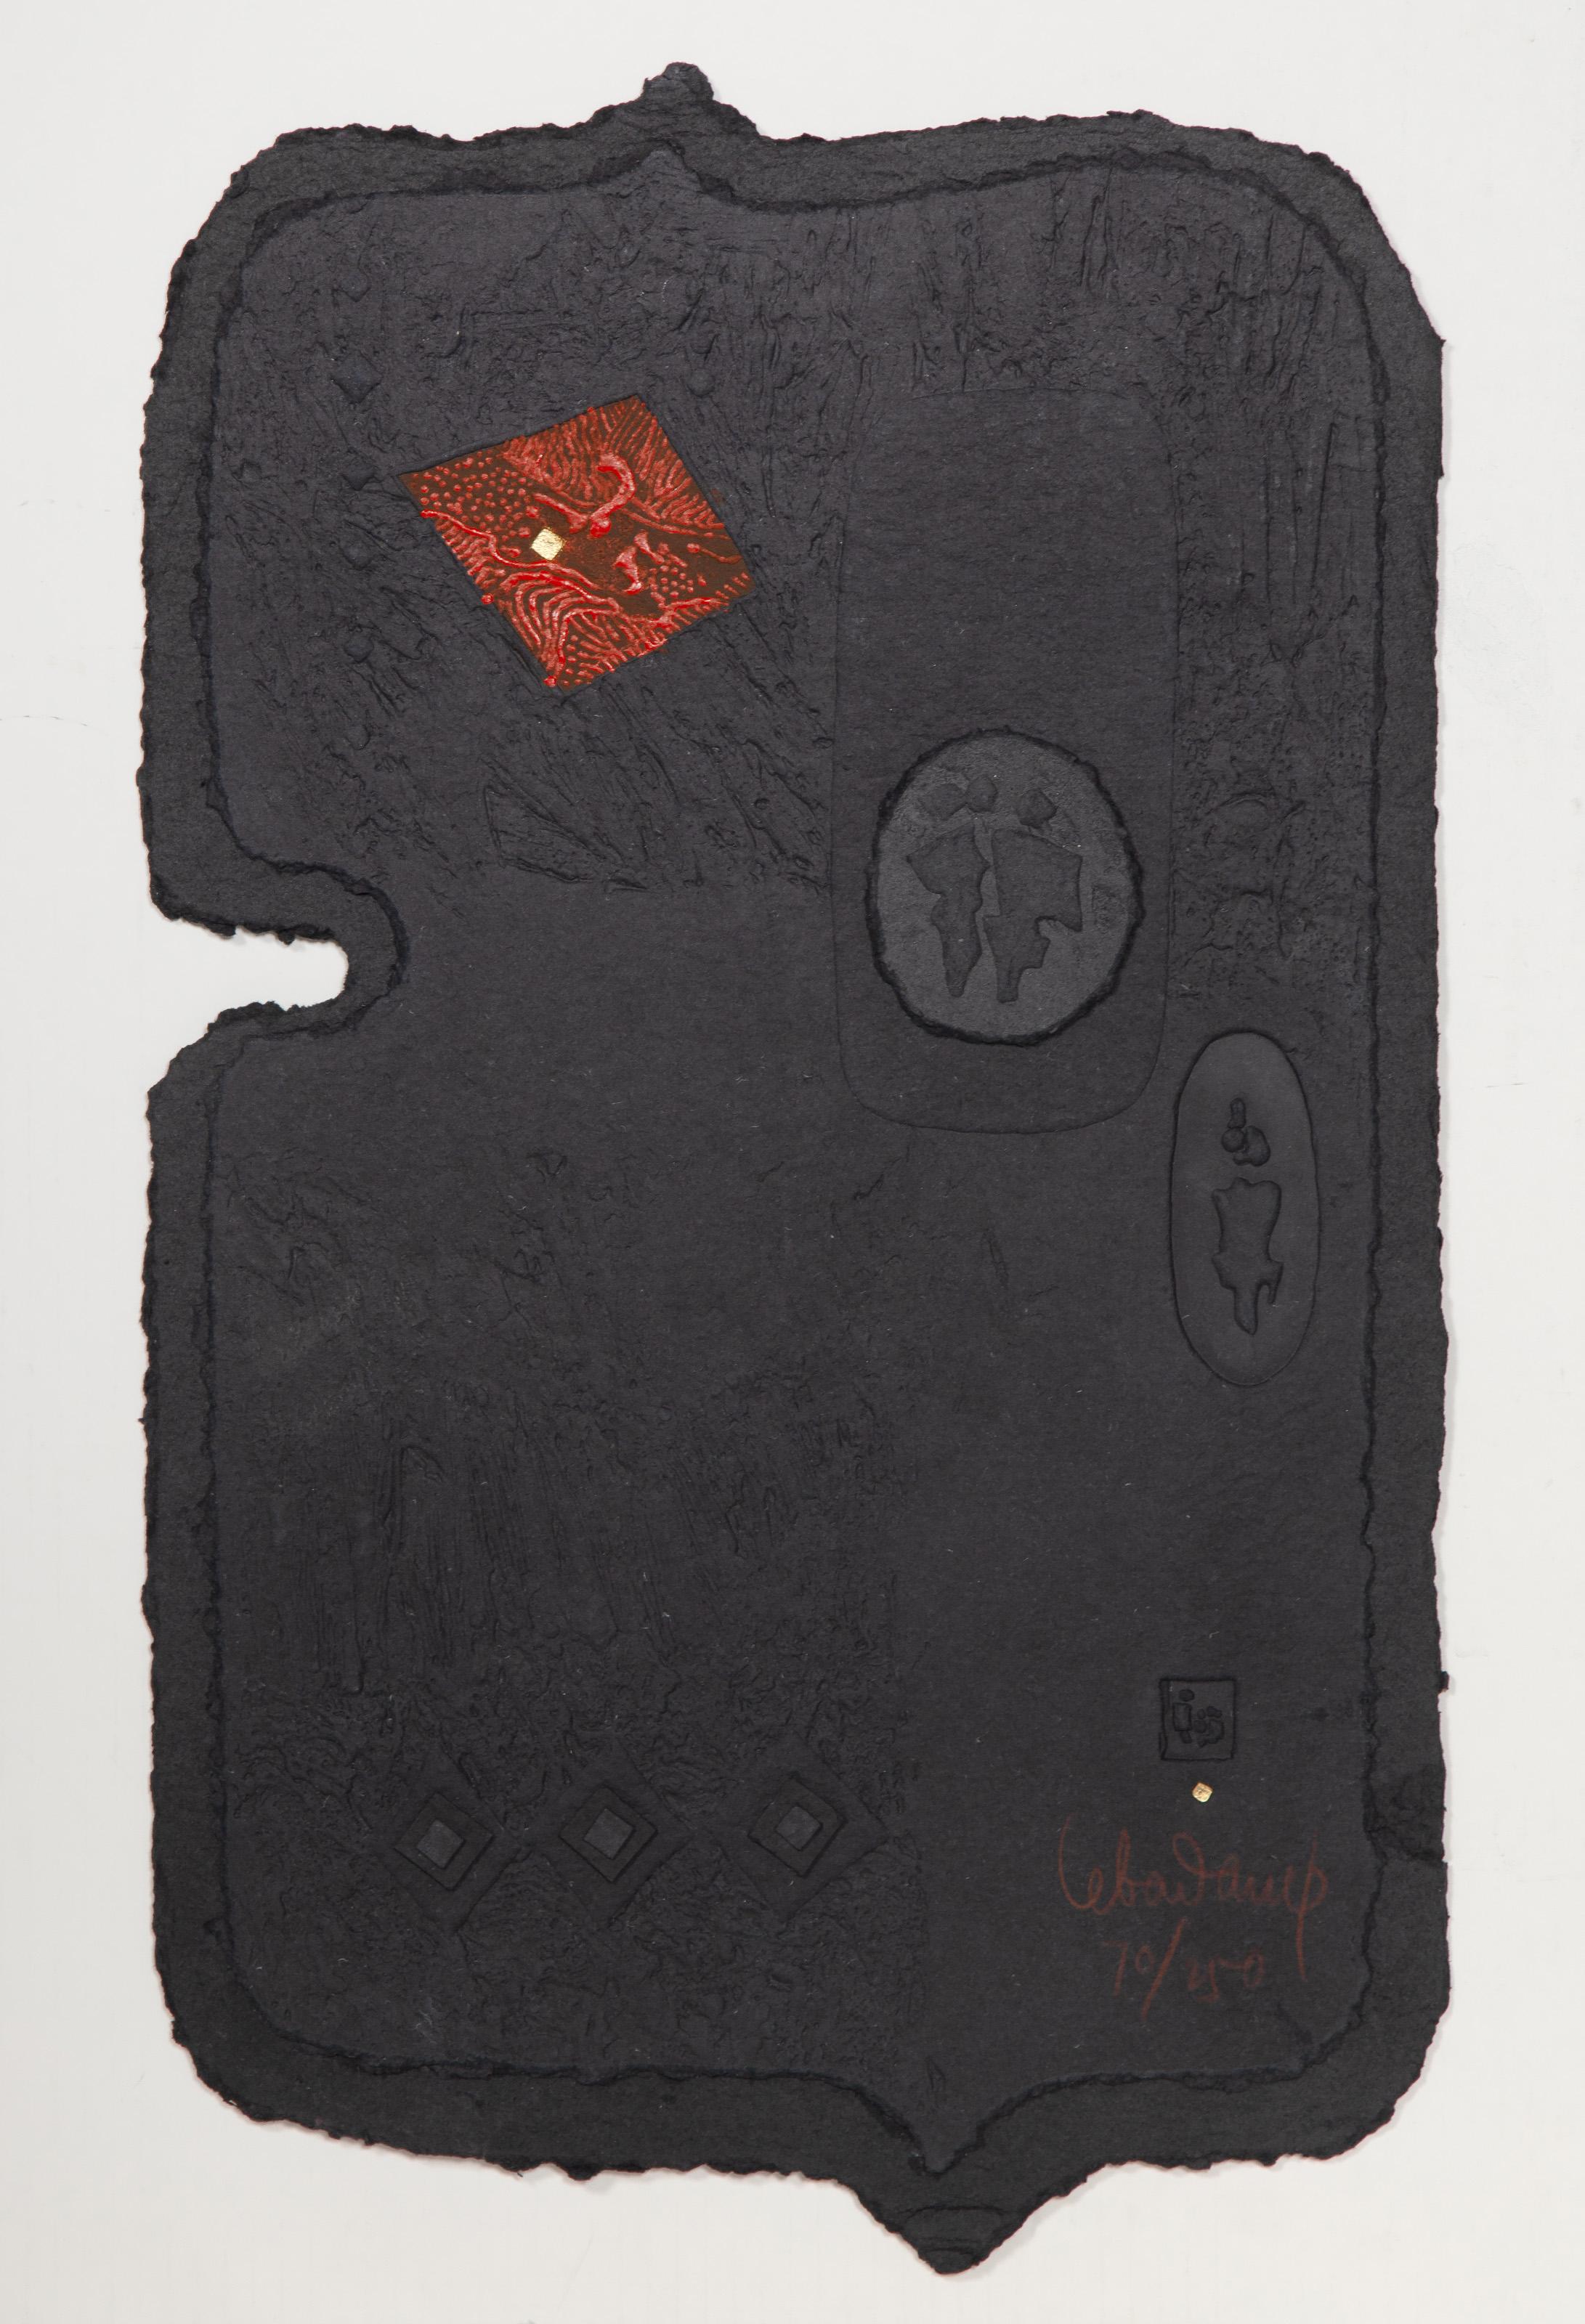 Lebadang (aka Hoi), Vietnamese (1922 - 2015) -  Abstract Relief. Year: 1986, Medium: Cast Paper and Gold Leaf signed and numbered in color pencil, Edition: 70/250, Size: 22.5 x 14.5 in. (57.15 x 36.83 cm), Publisher: C.F.A Corp 